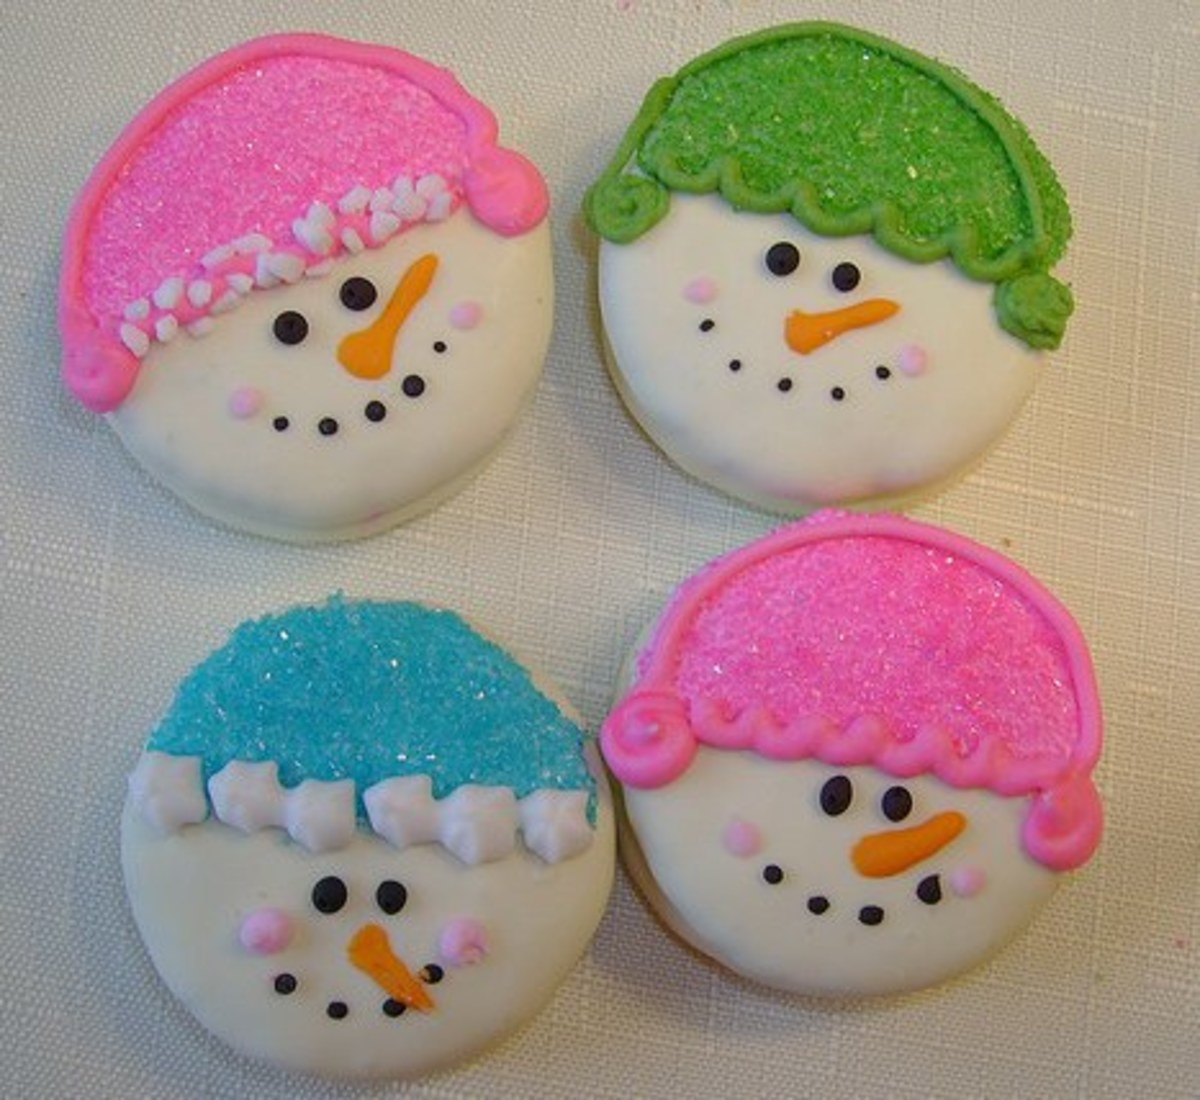 Easy snowman cookies made from Oreos dipped in white chocolate. Hats made from colored sprinkles.